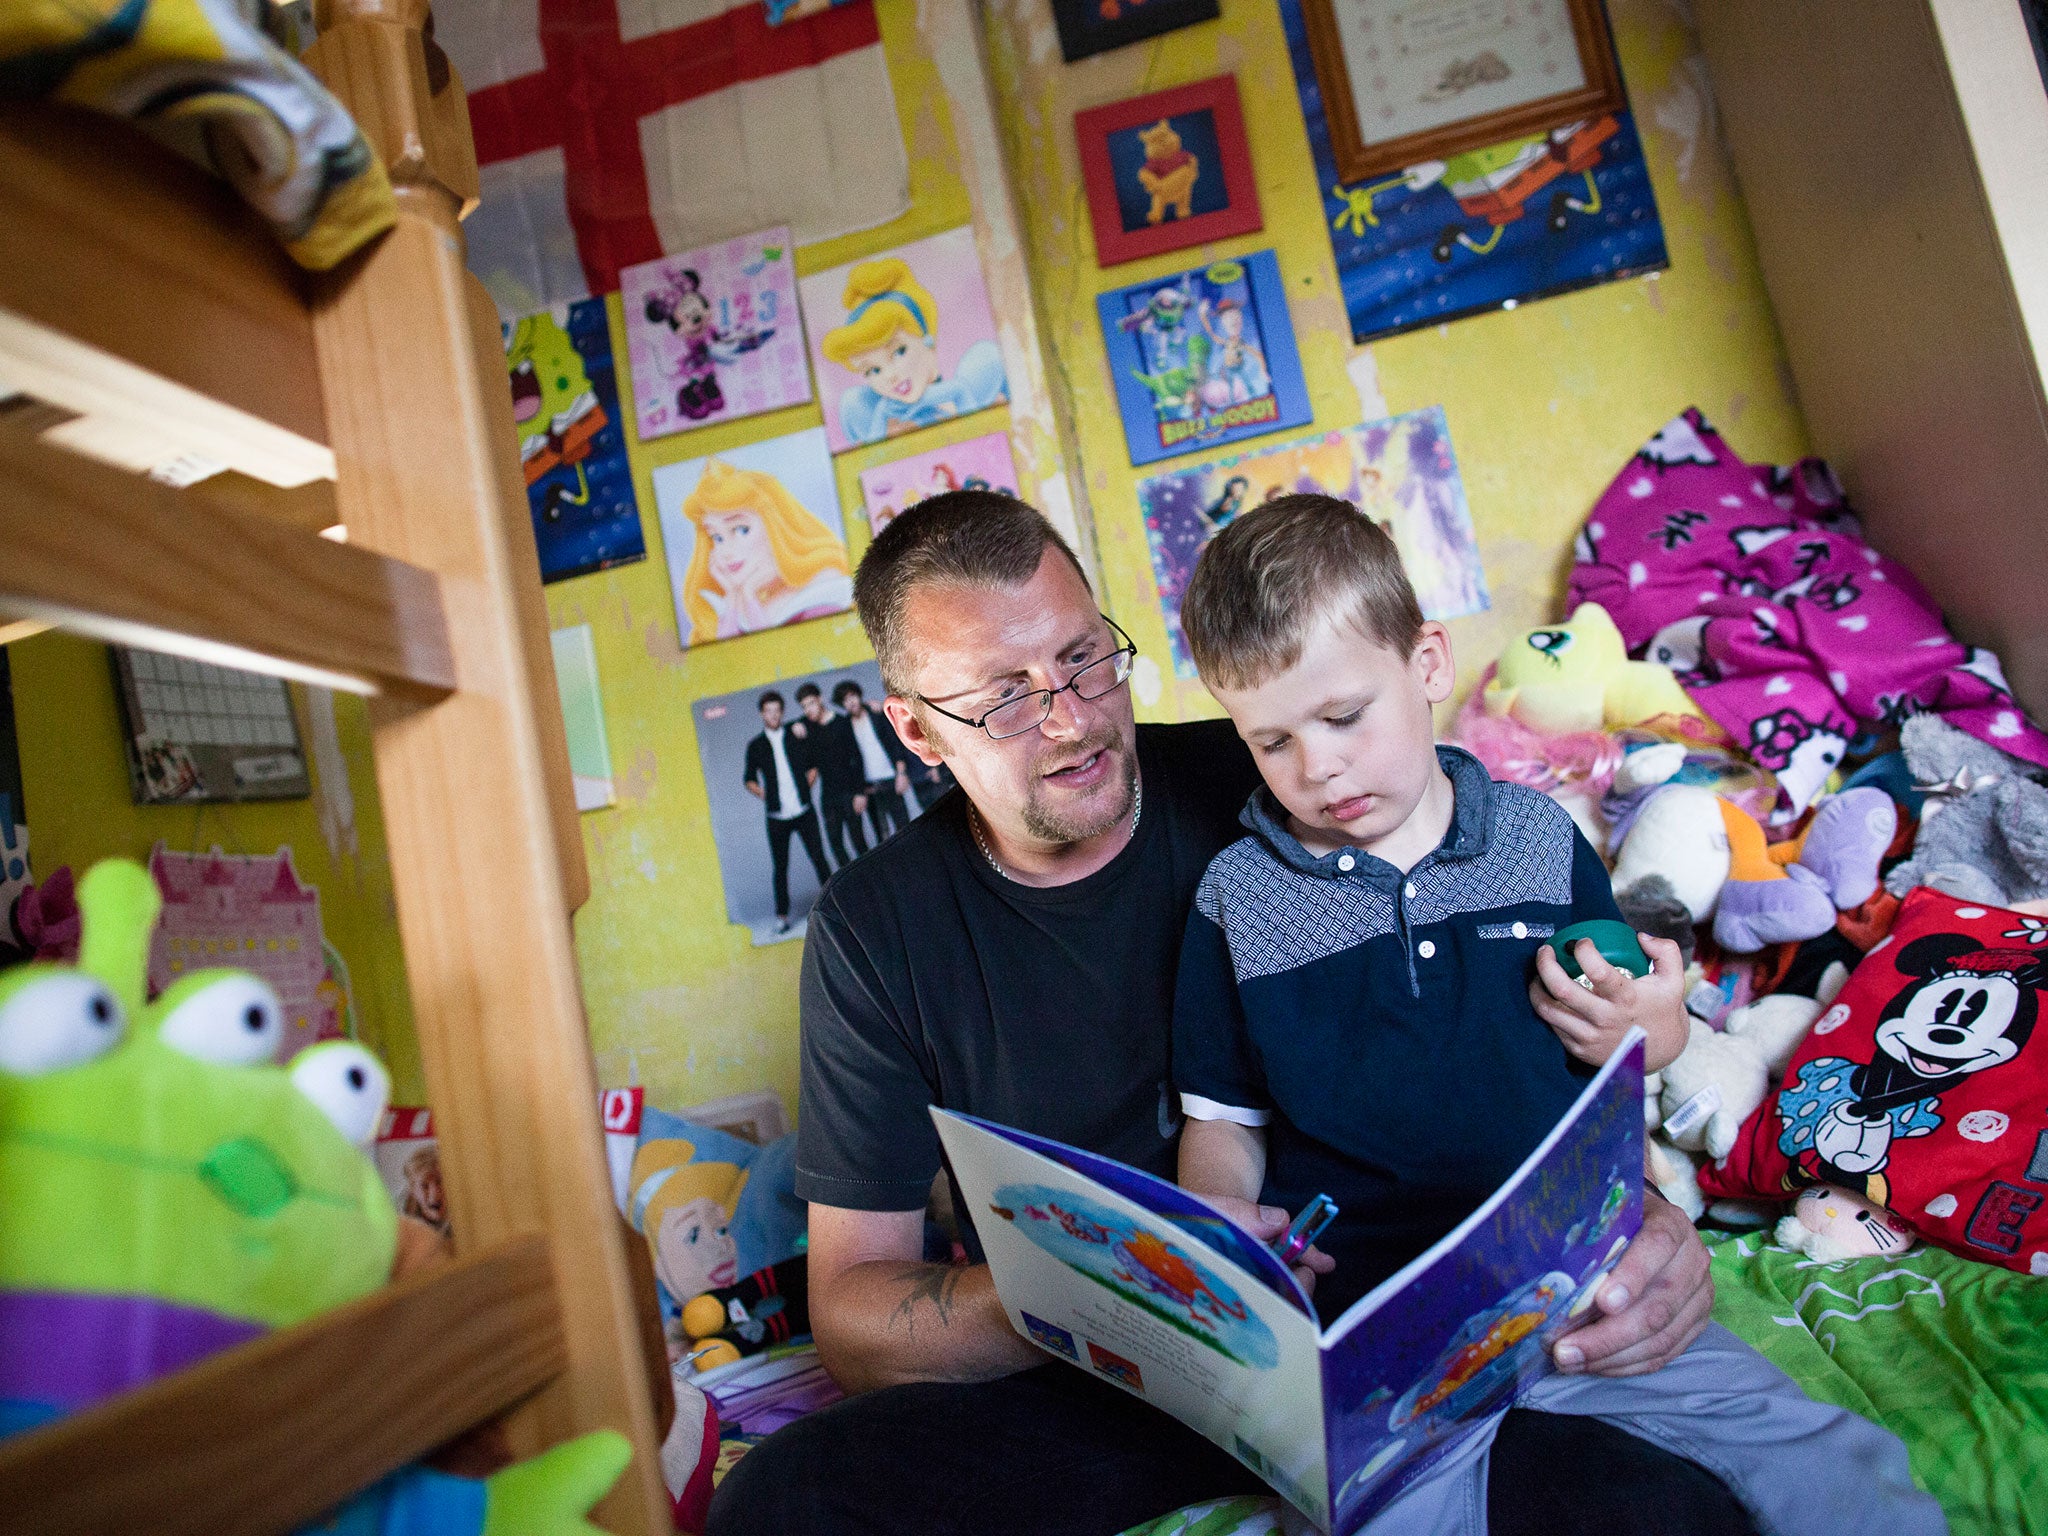 Damien (39) reads to Lucas (5) at home in Sheffield. The family is involved in the FAST  (Families and Schools Together) programme which encourages parents to read to their children at home